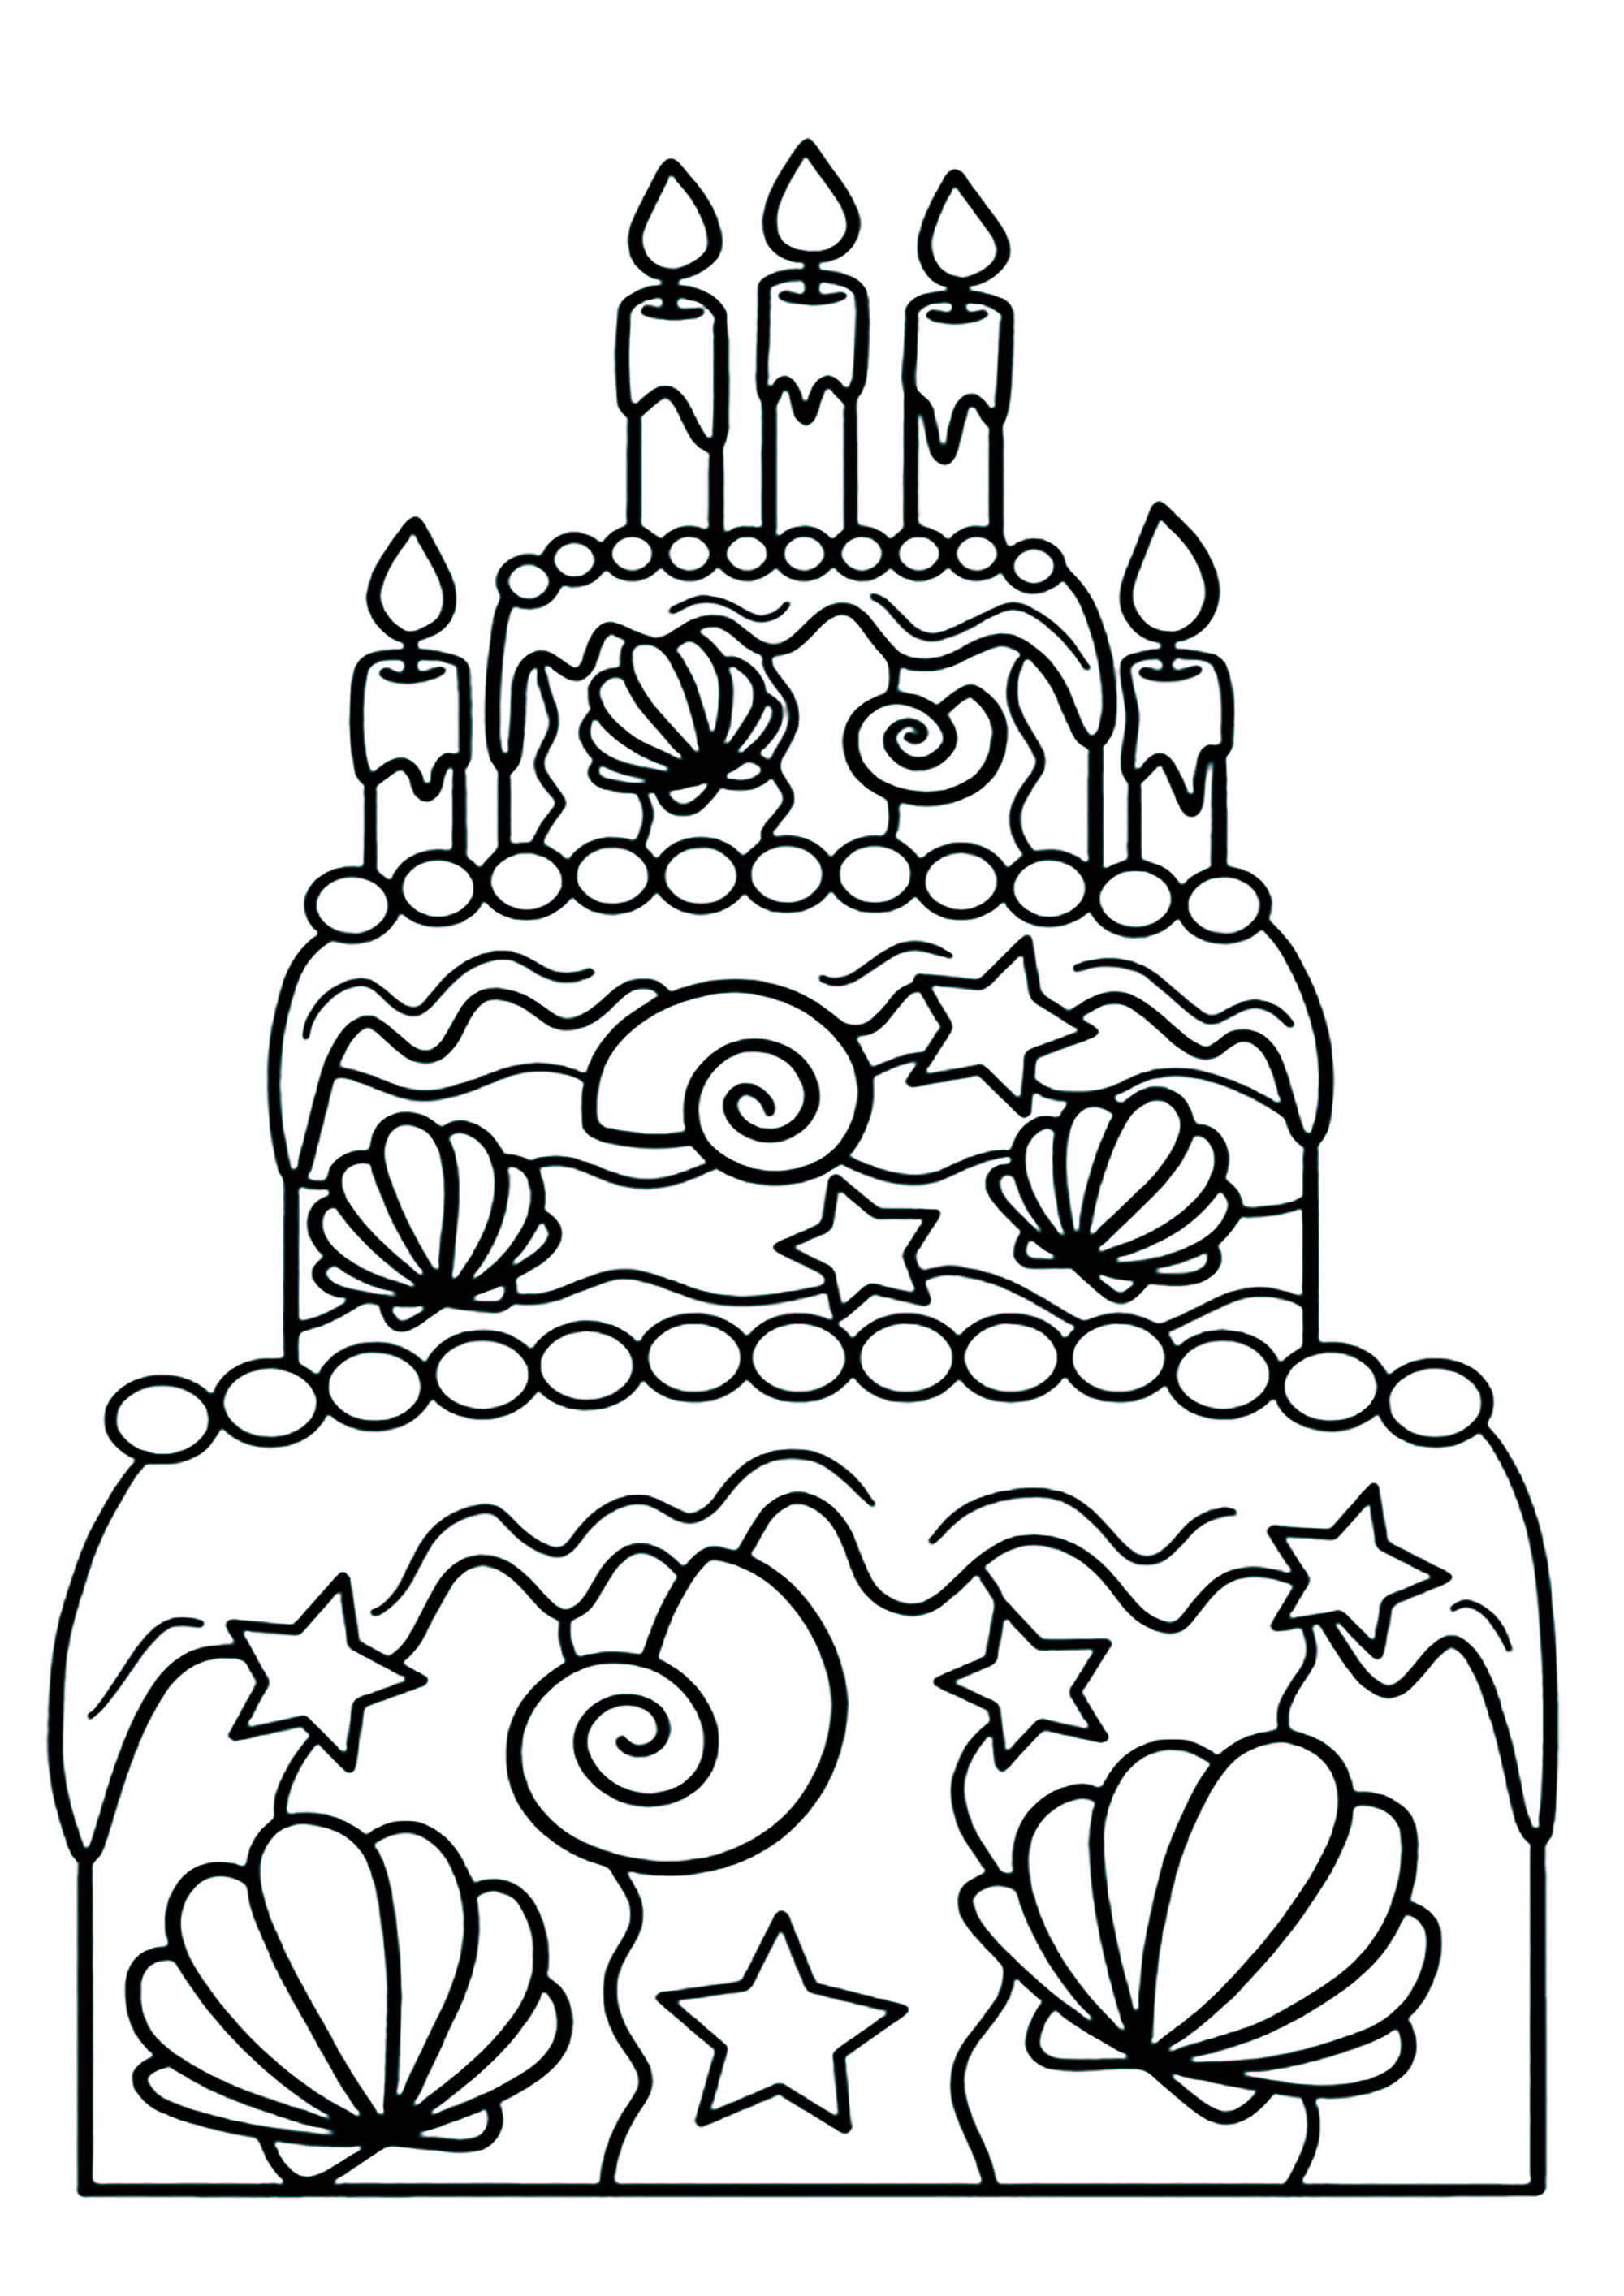 Birthdays coloring page to download for free